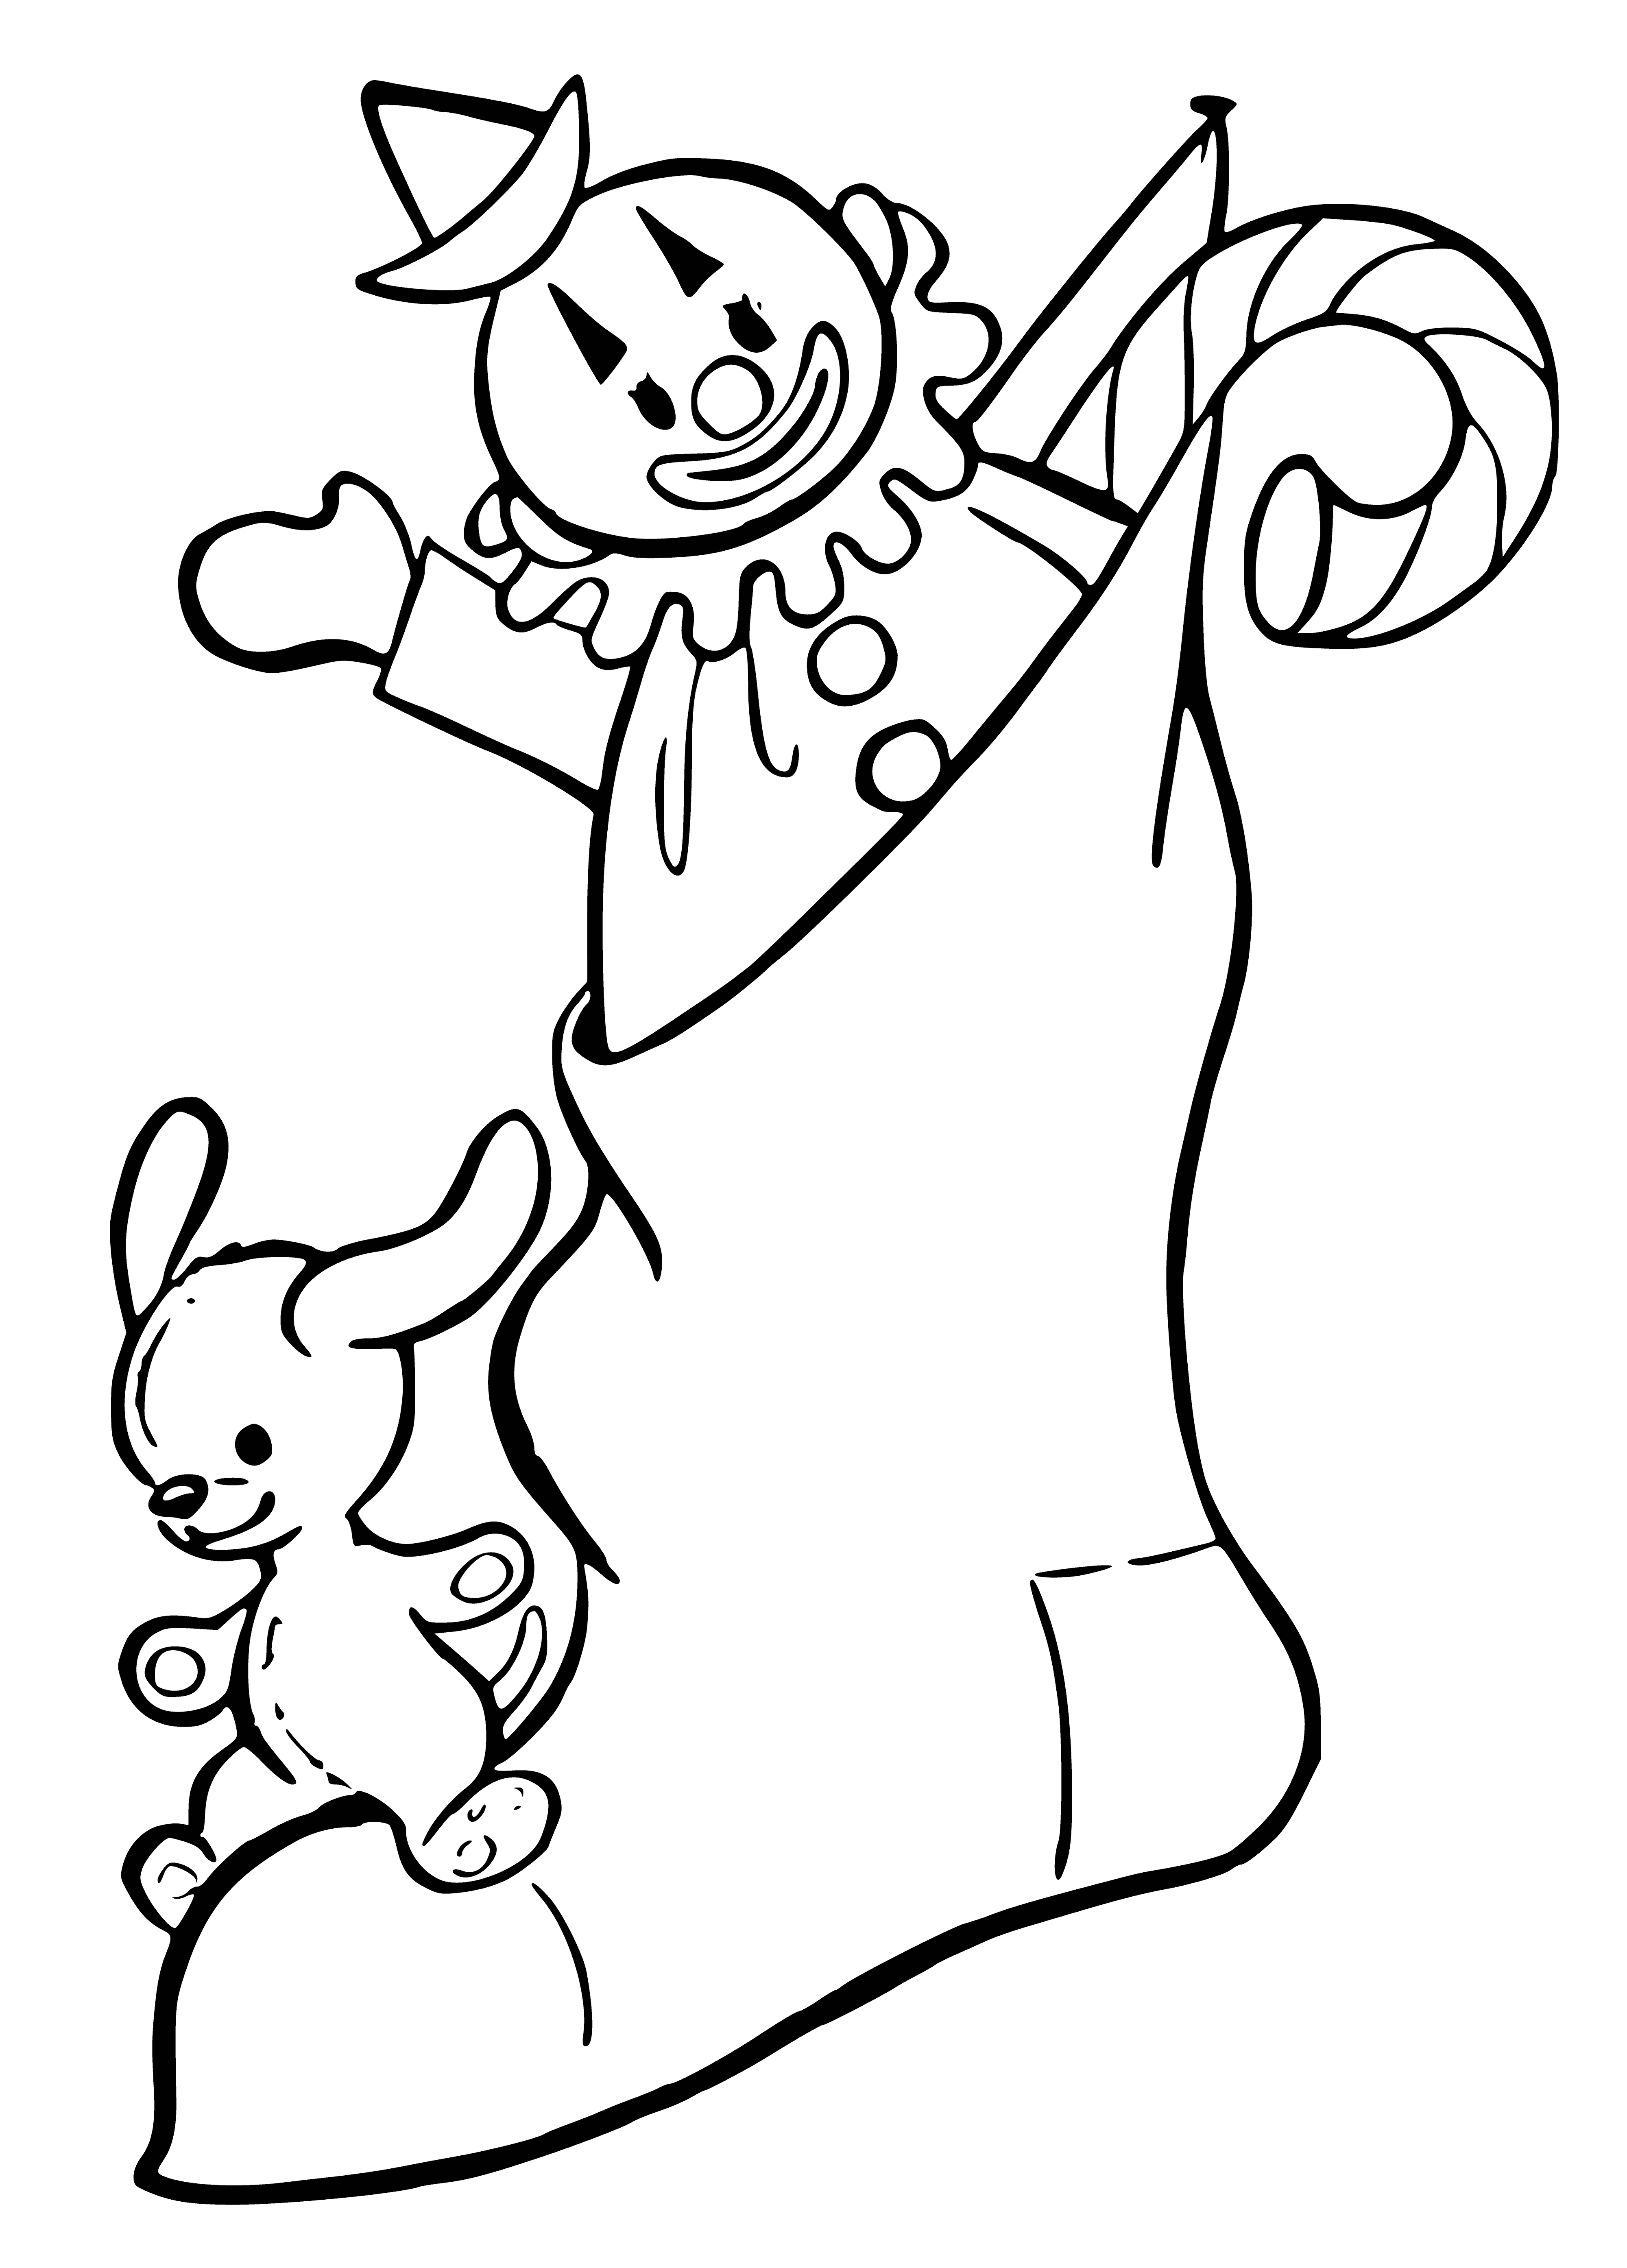 Coloring page has socks w/ Christmas symbols (X-tree, gingerbread, snowman, reindeer) in green, red & white. #holidaycolor